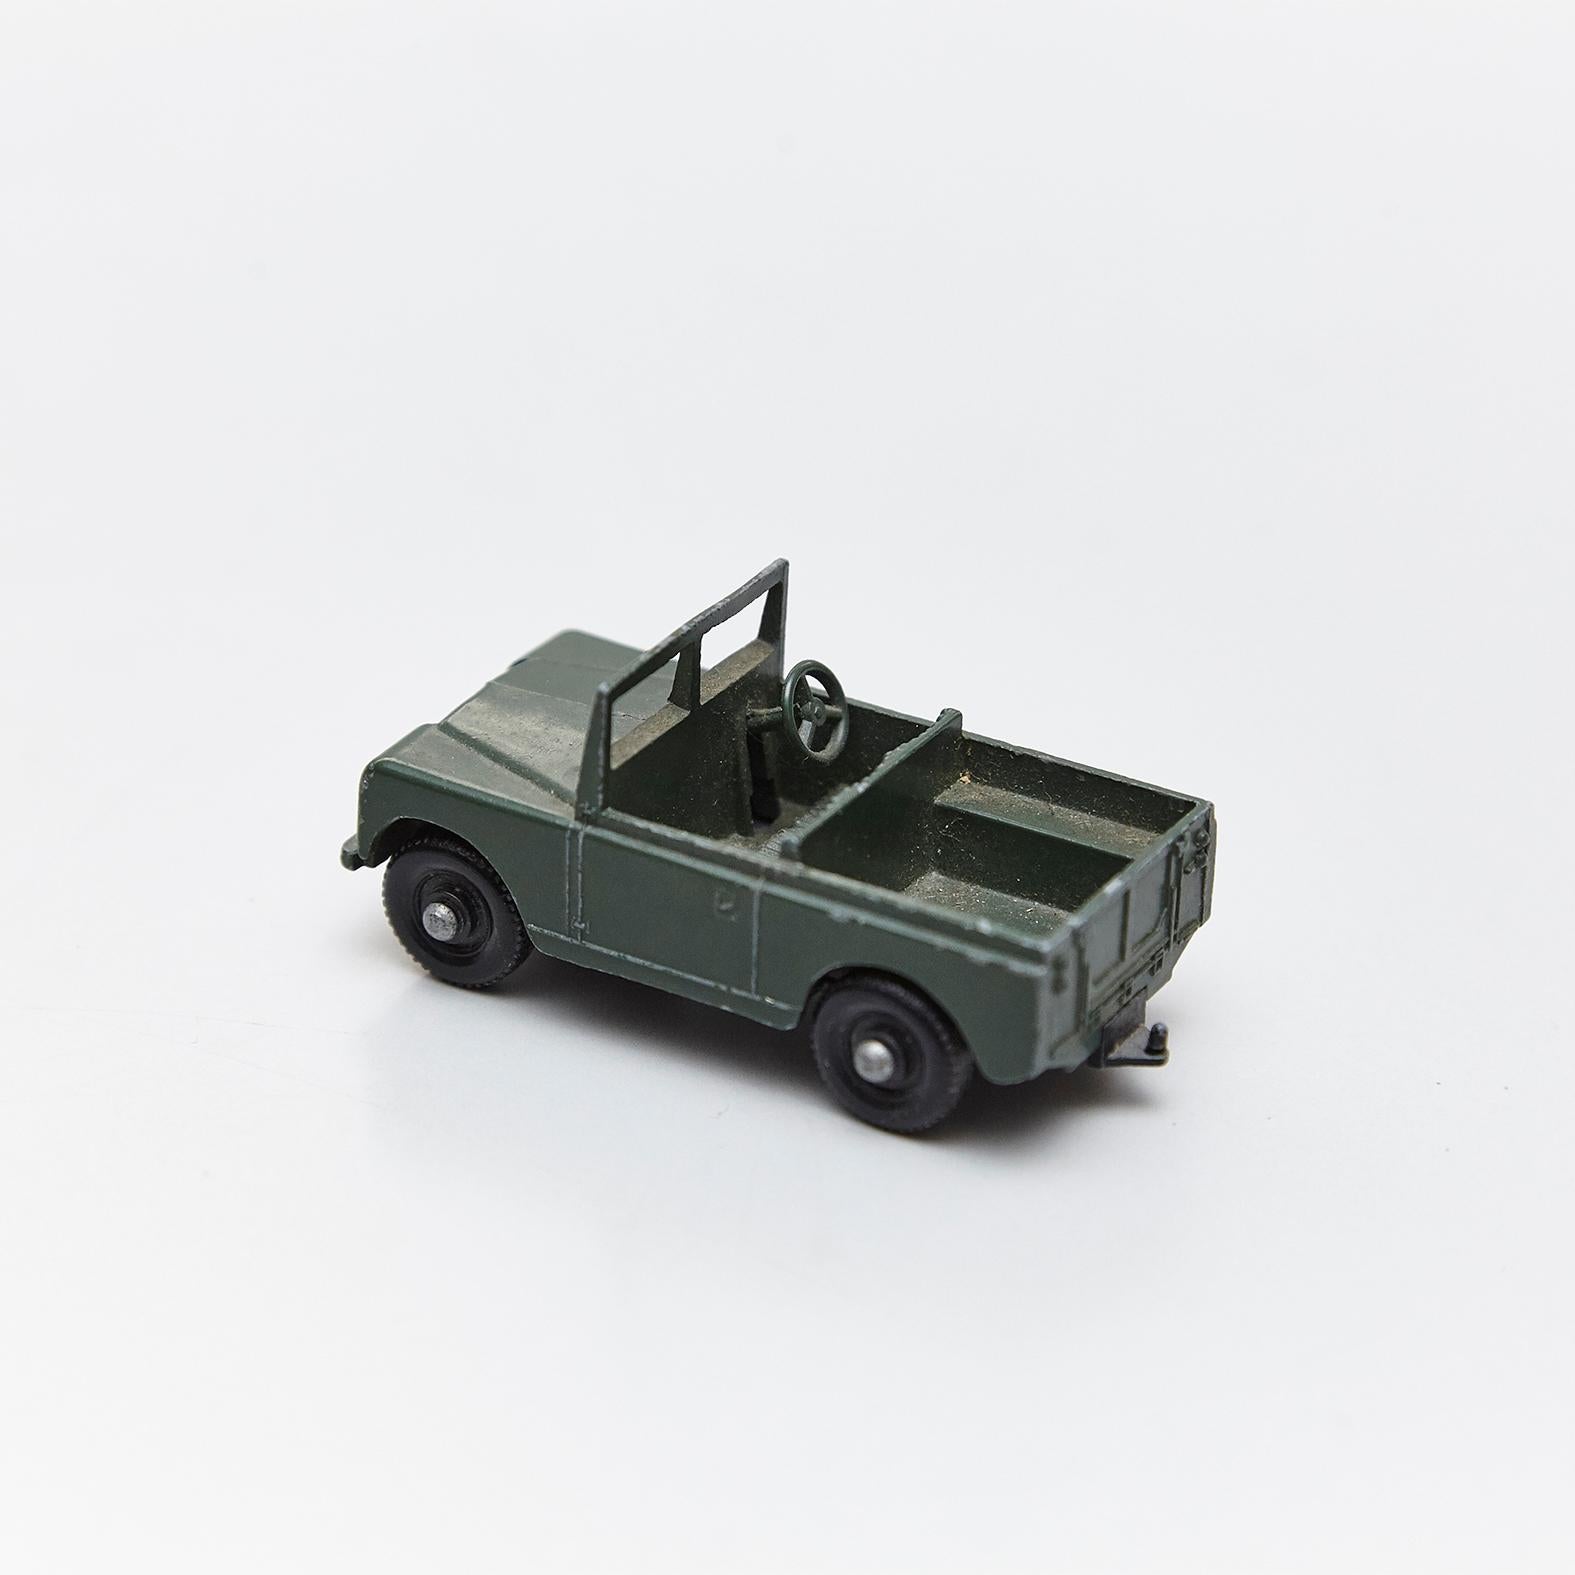 20th Century Lesney Matchboxes Series Antique Metal Toy Cars Green Military - Free Shipping